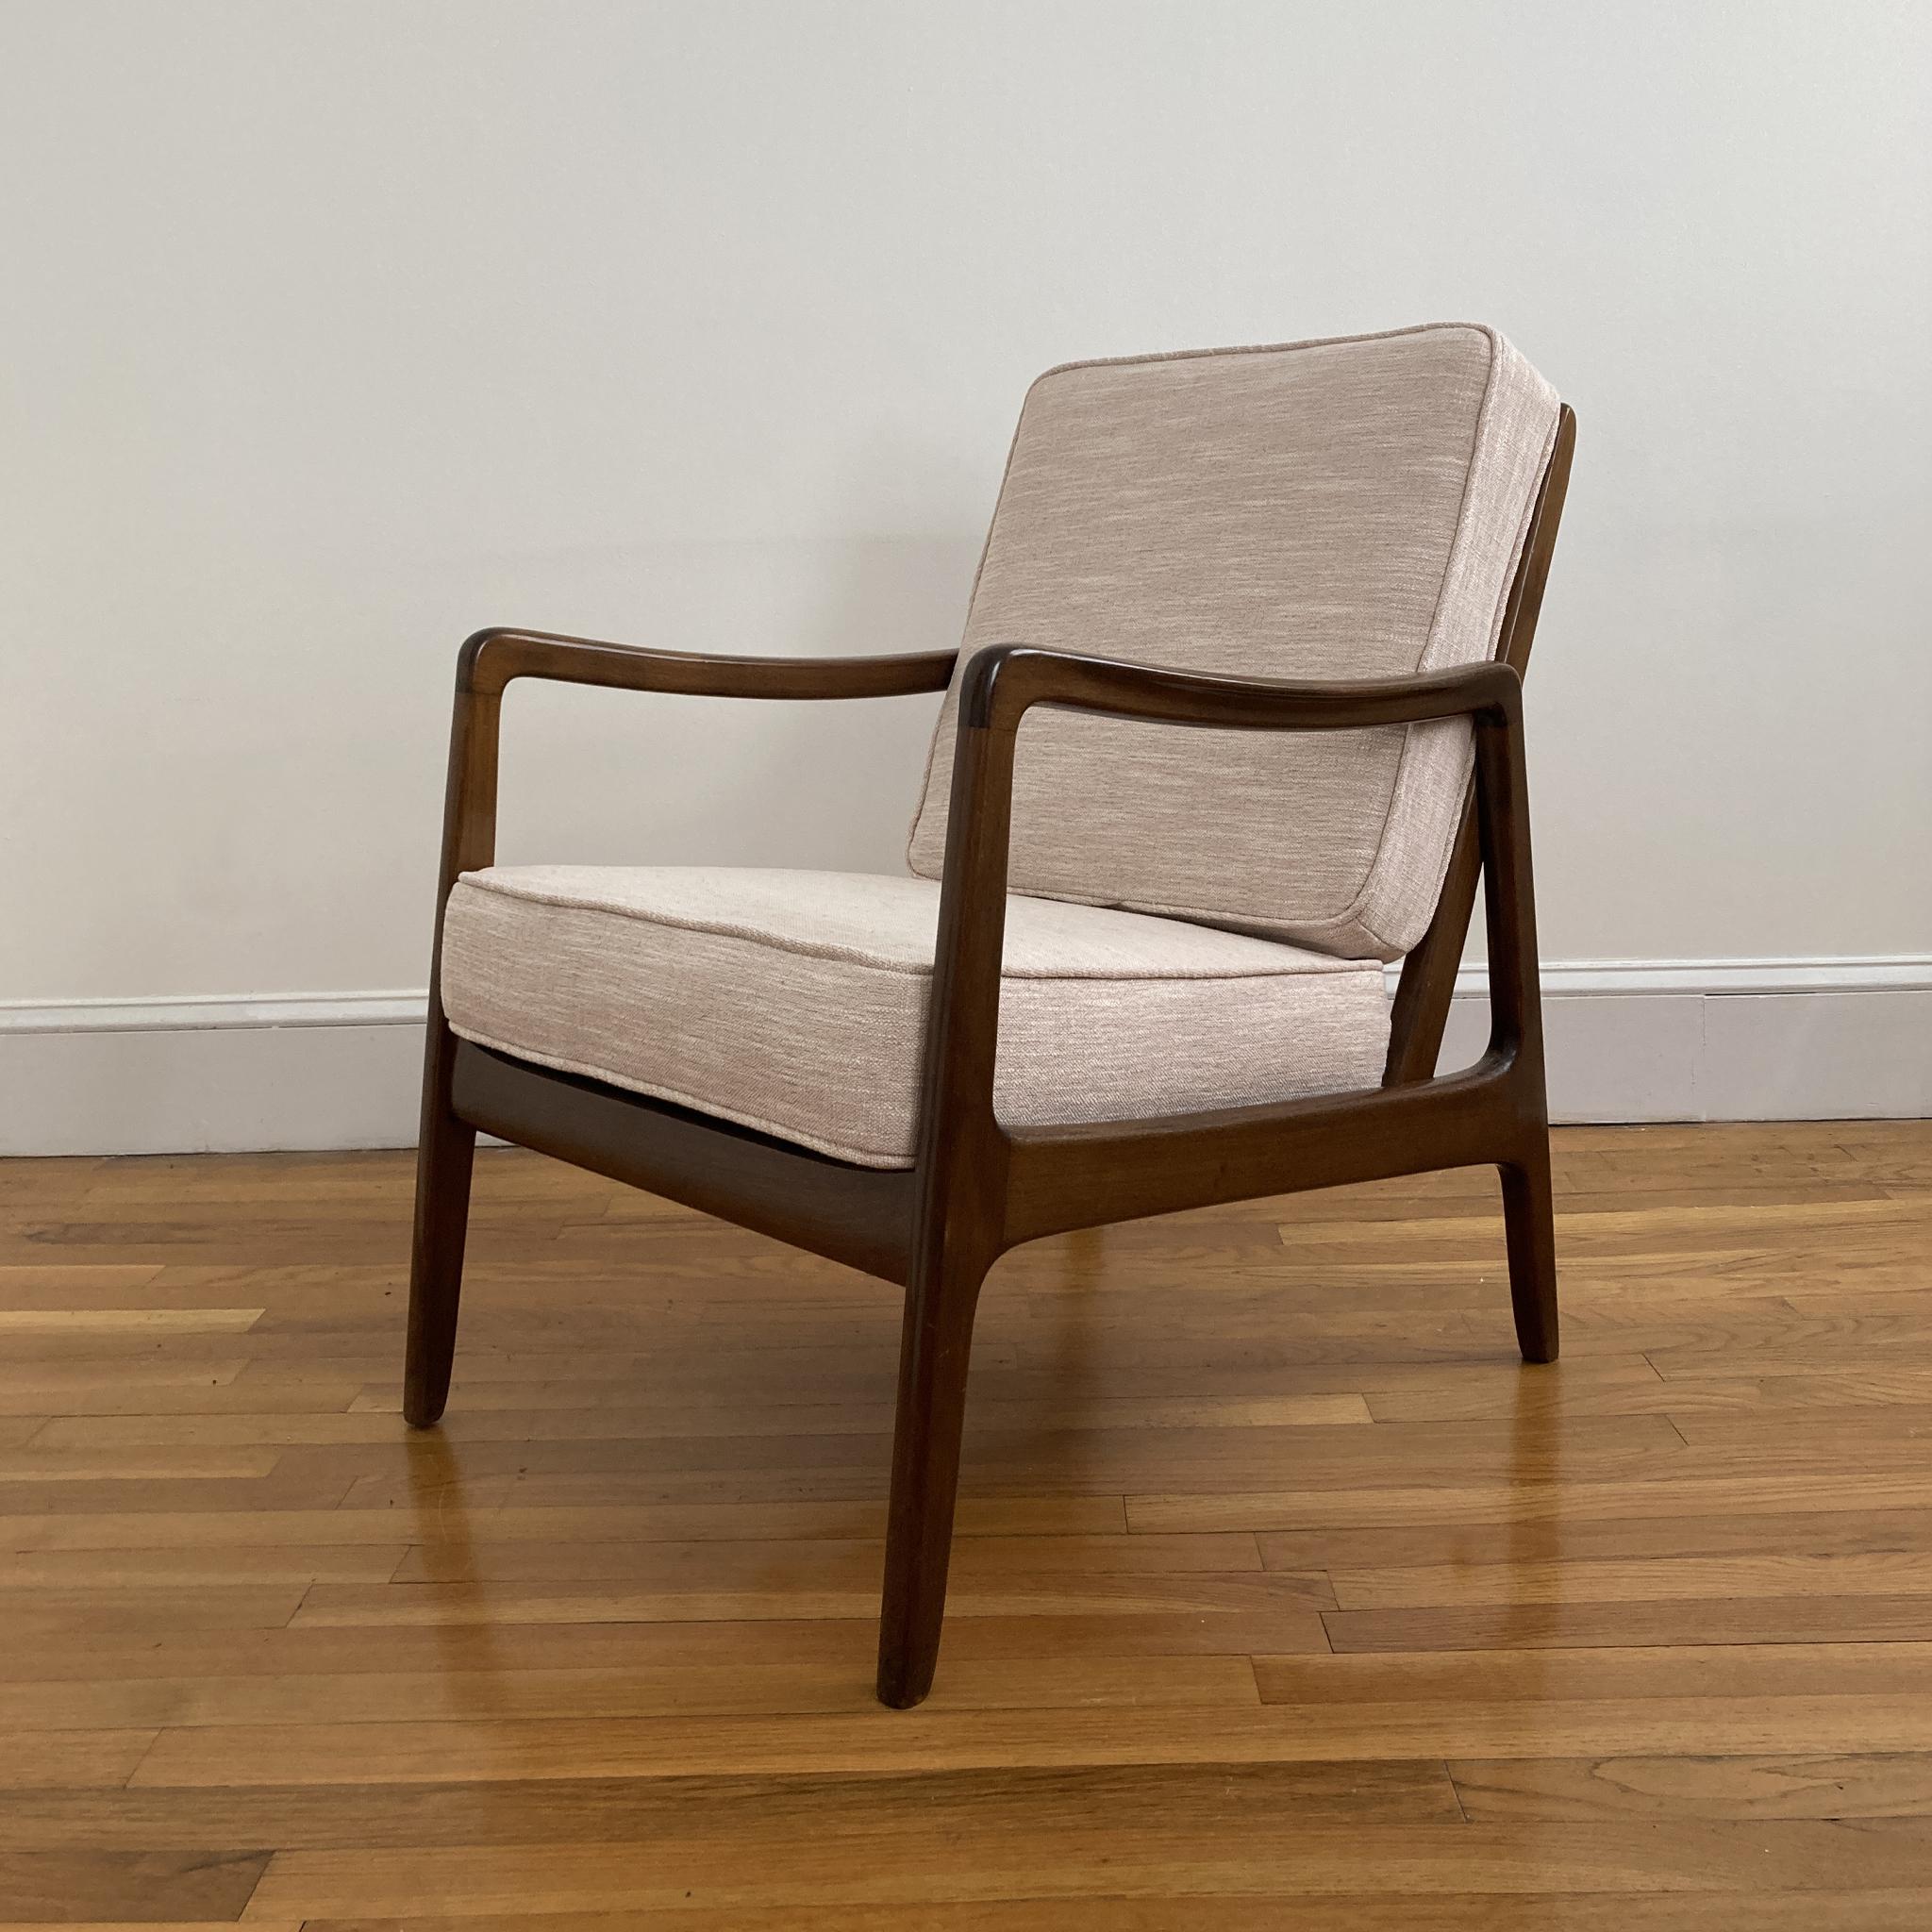 Mid-20th Century Ole Wanscher for John Stuart Walnut Lounge Chair Reupholstered in Blush Tweed